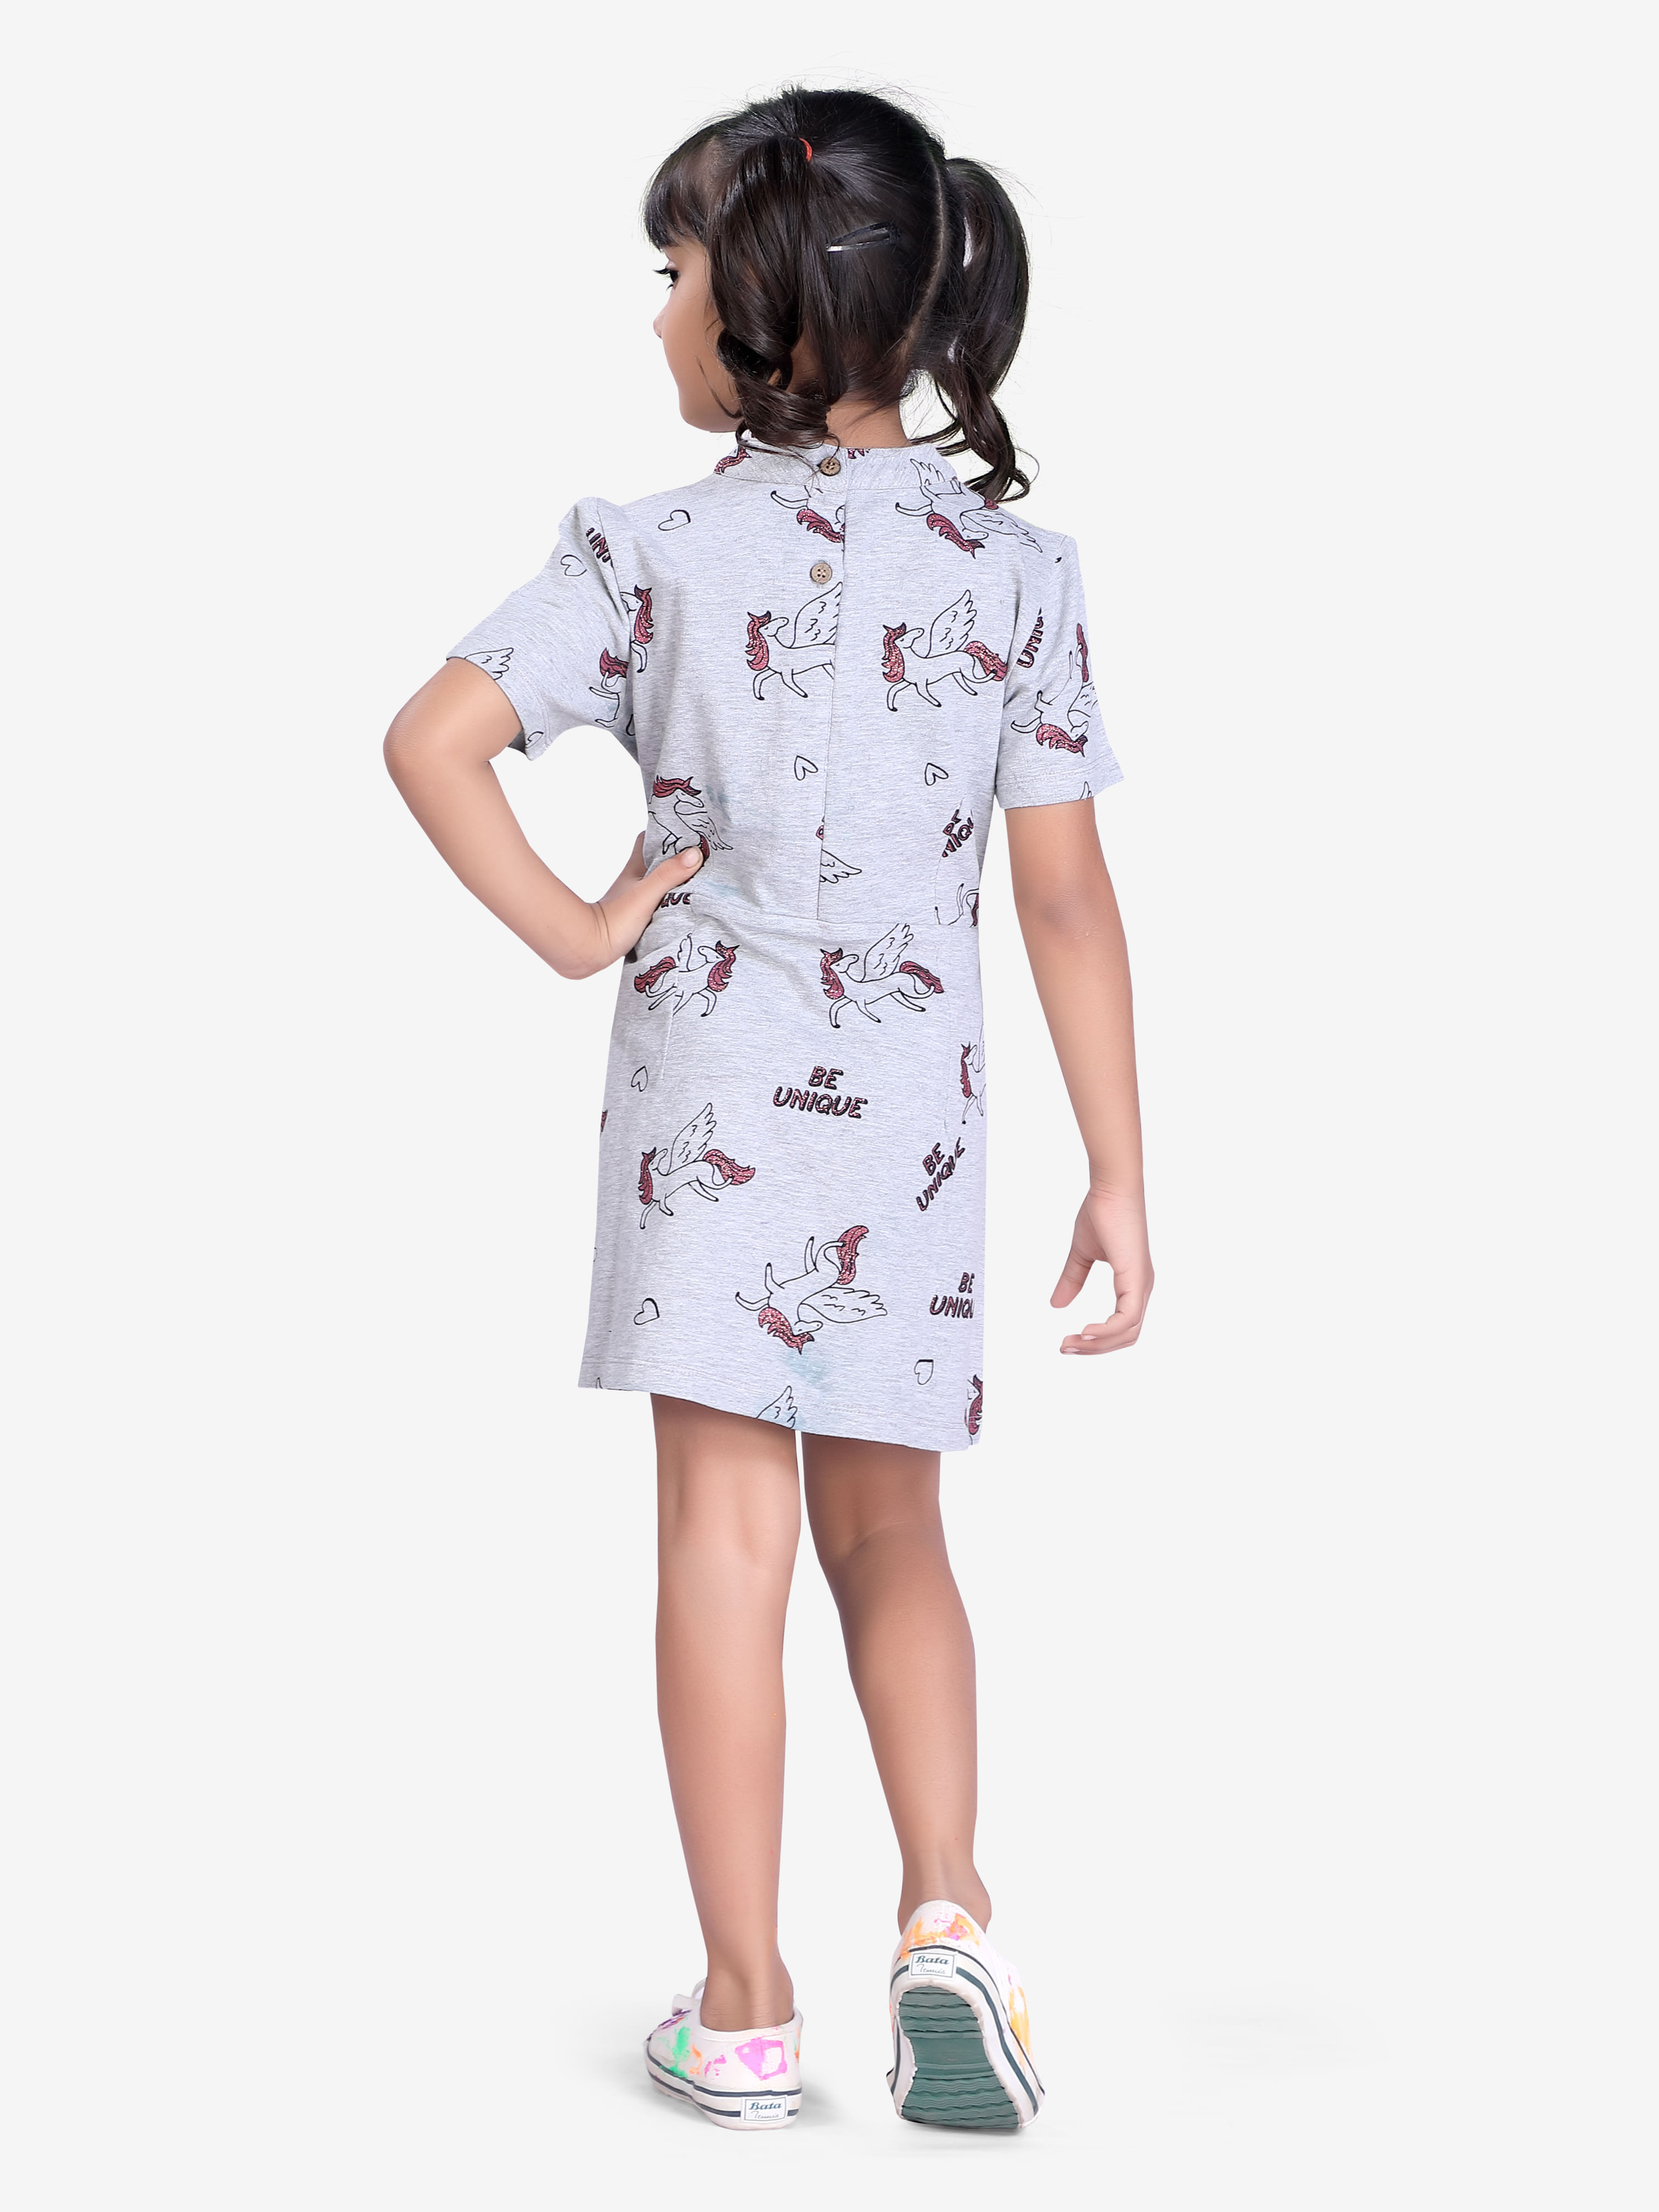 Buy Unicorn Dress For Kids Girls Online In India At Discounted Prices